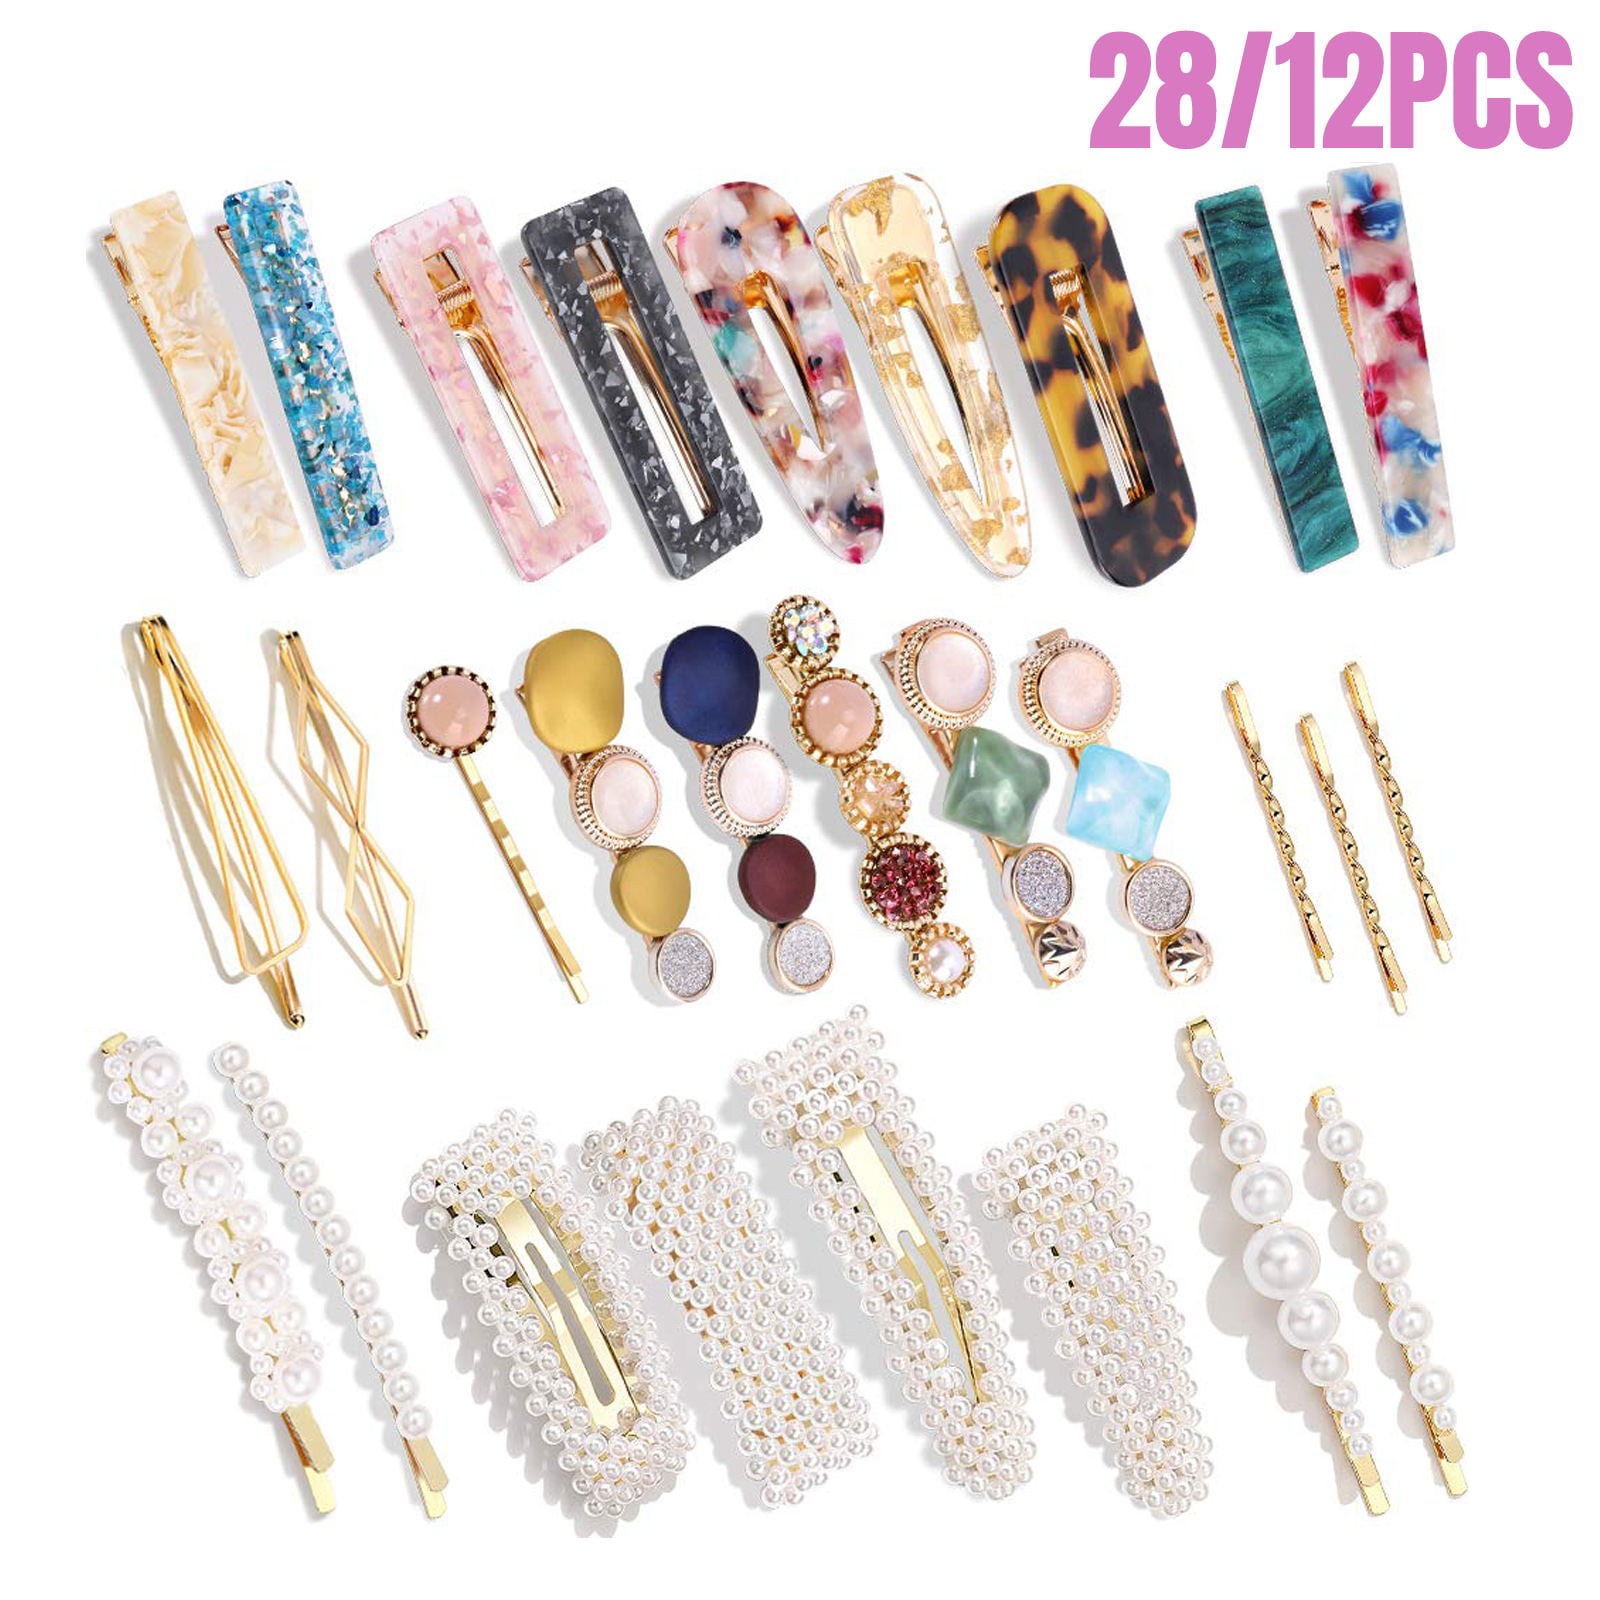 12 pcs/lot fashionable glitter hair snap clips colorful solid metal hairpins 